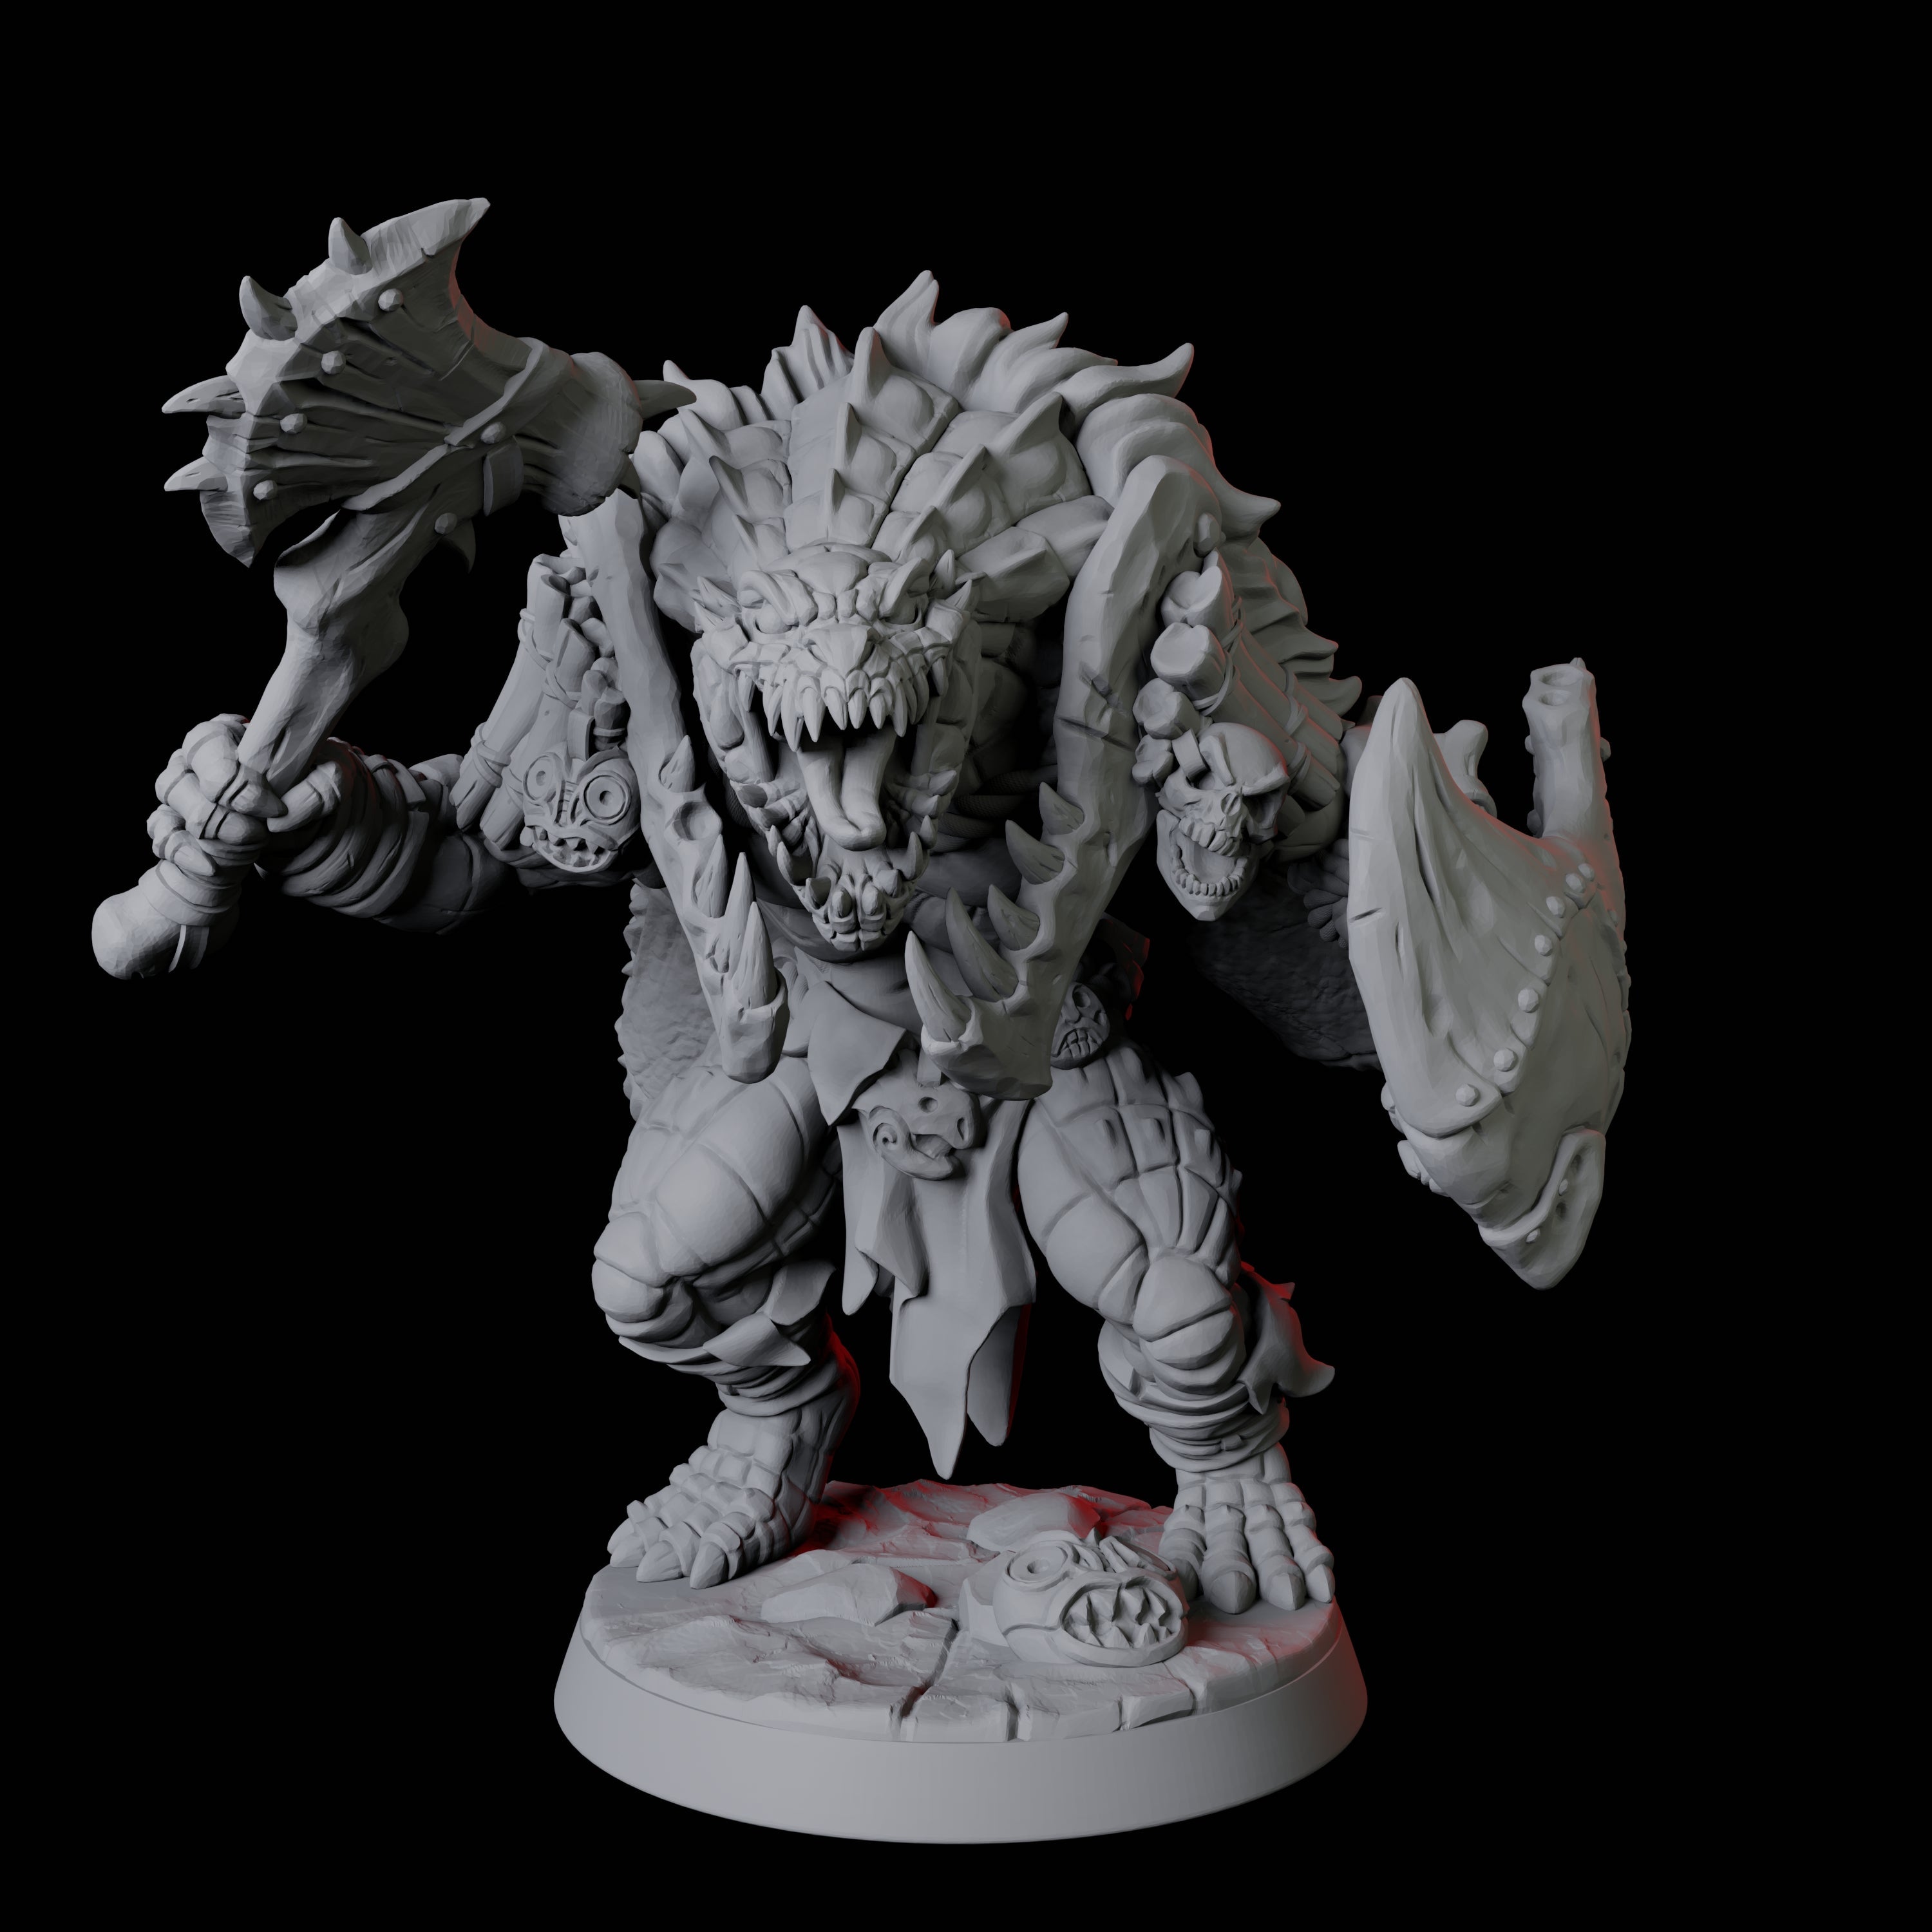 Powerful Frost Lizardfolk D Miniature for Dungeons and Dragons, Pathfinder or other TTRPGs